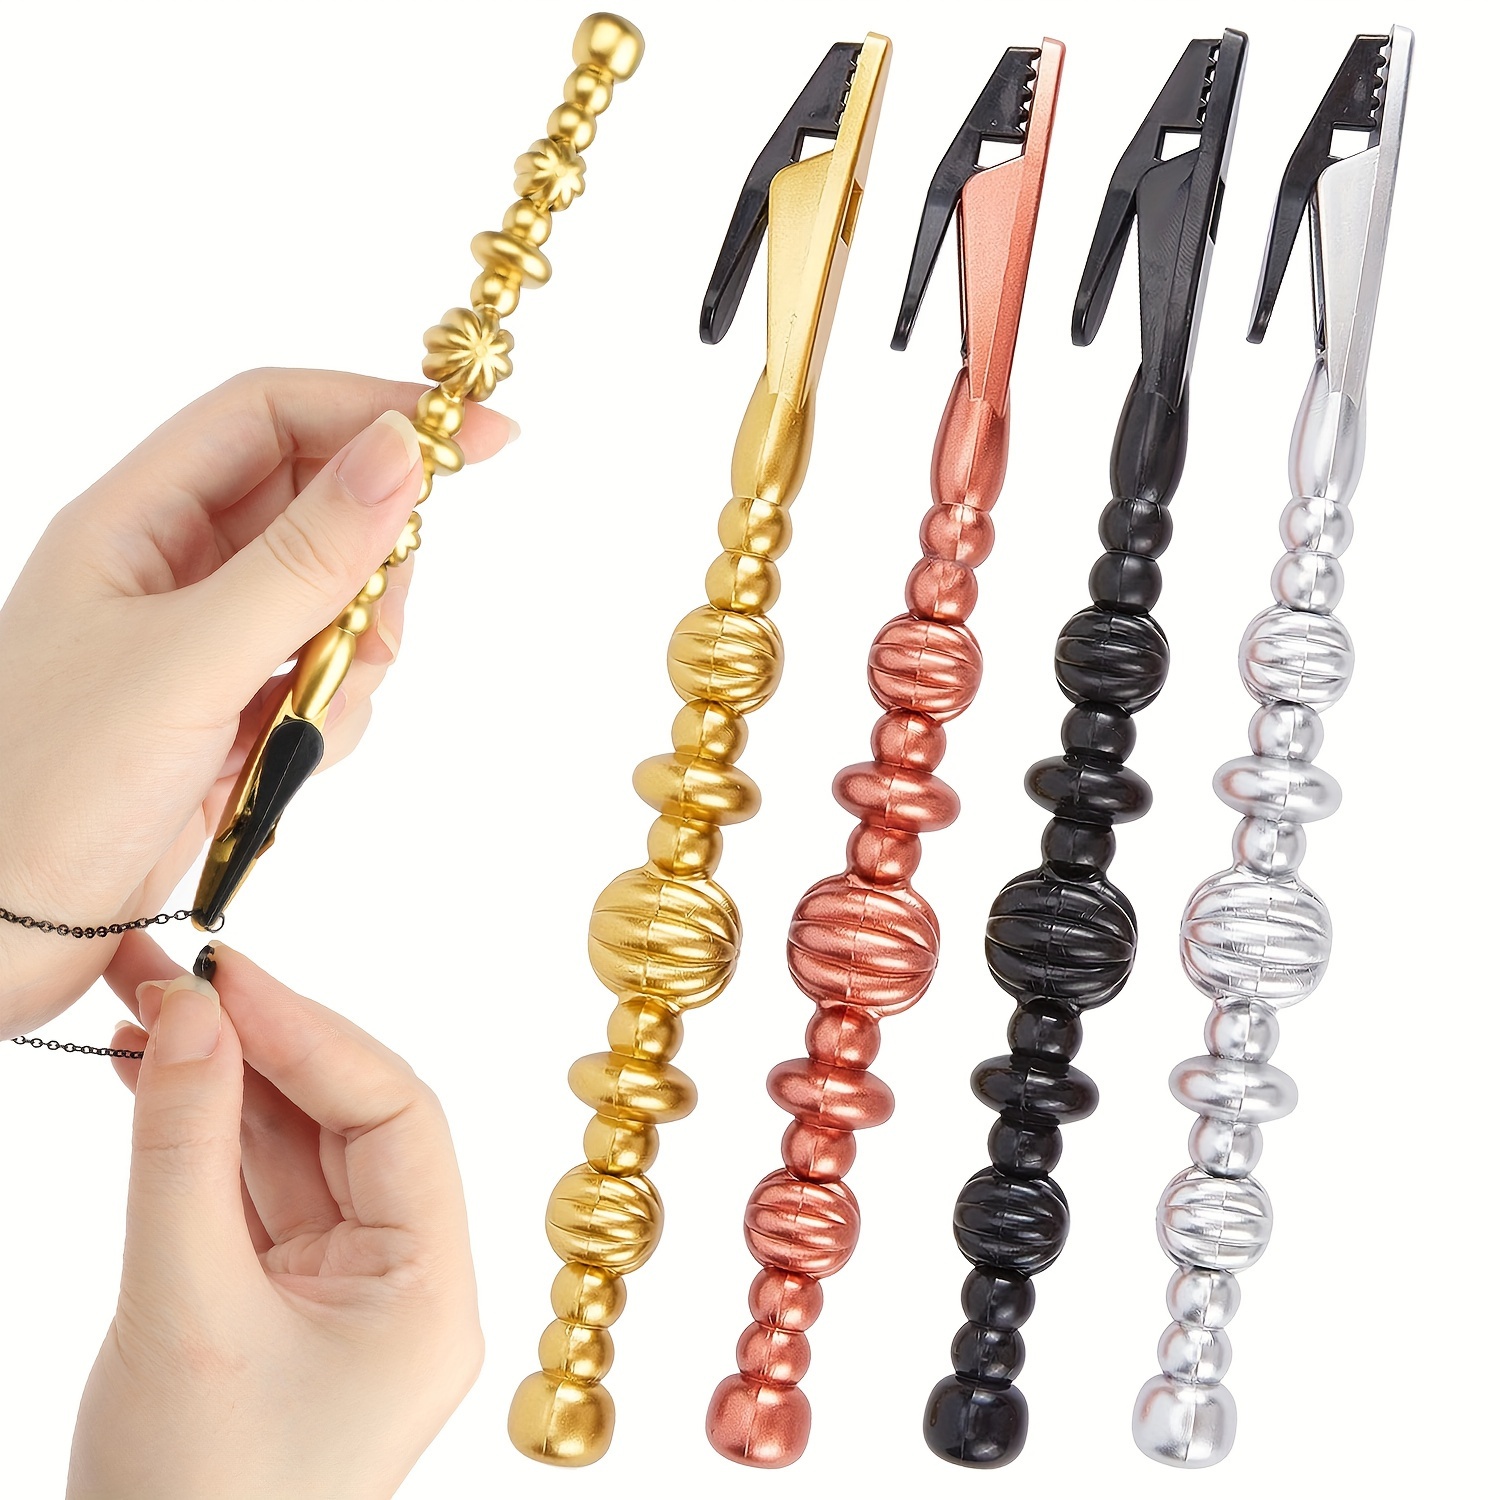 1pc Bracelet Helper Tool Roach Clips For Joints Jewelry Making Tools  Jewelry Repair Kit Bracelet Extender Tool Pliers For Jewelry Making  Bracelet Maker Fastening And Hooking Equipment